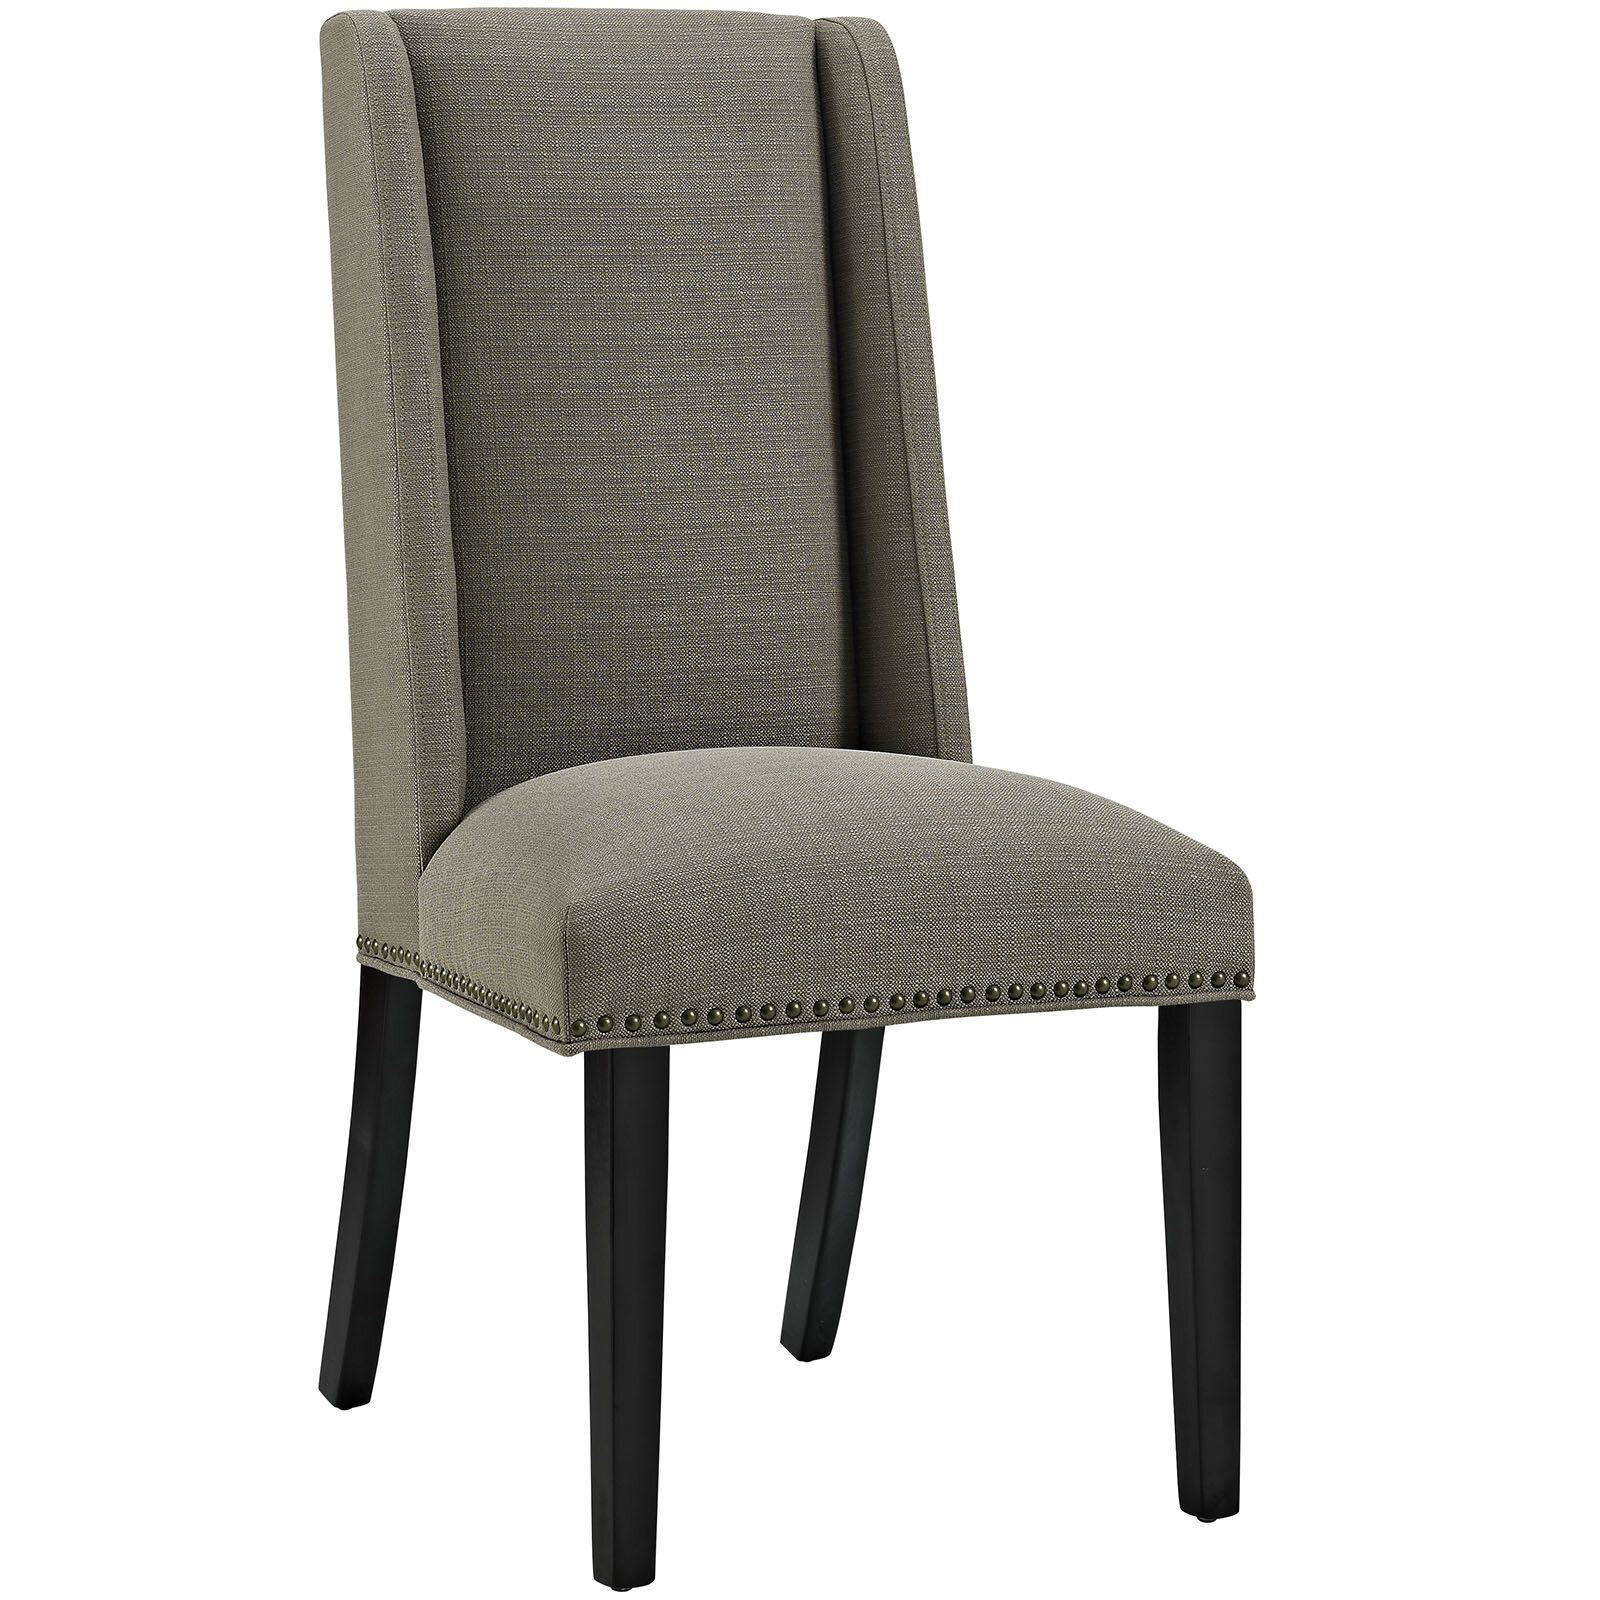 Galewood Wood Leg Upholstered Dining Chair In Carlton Wood Leg Upholstered Dining Chairs (View 10 of 15)